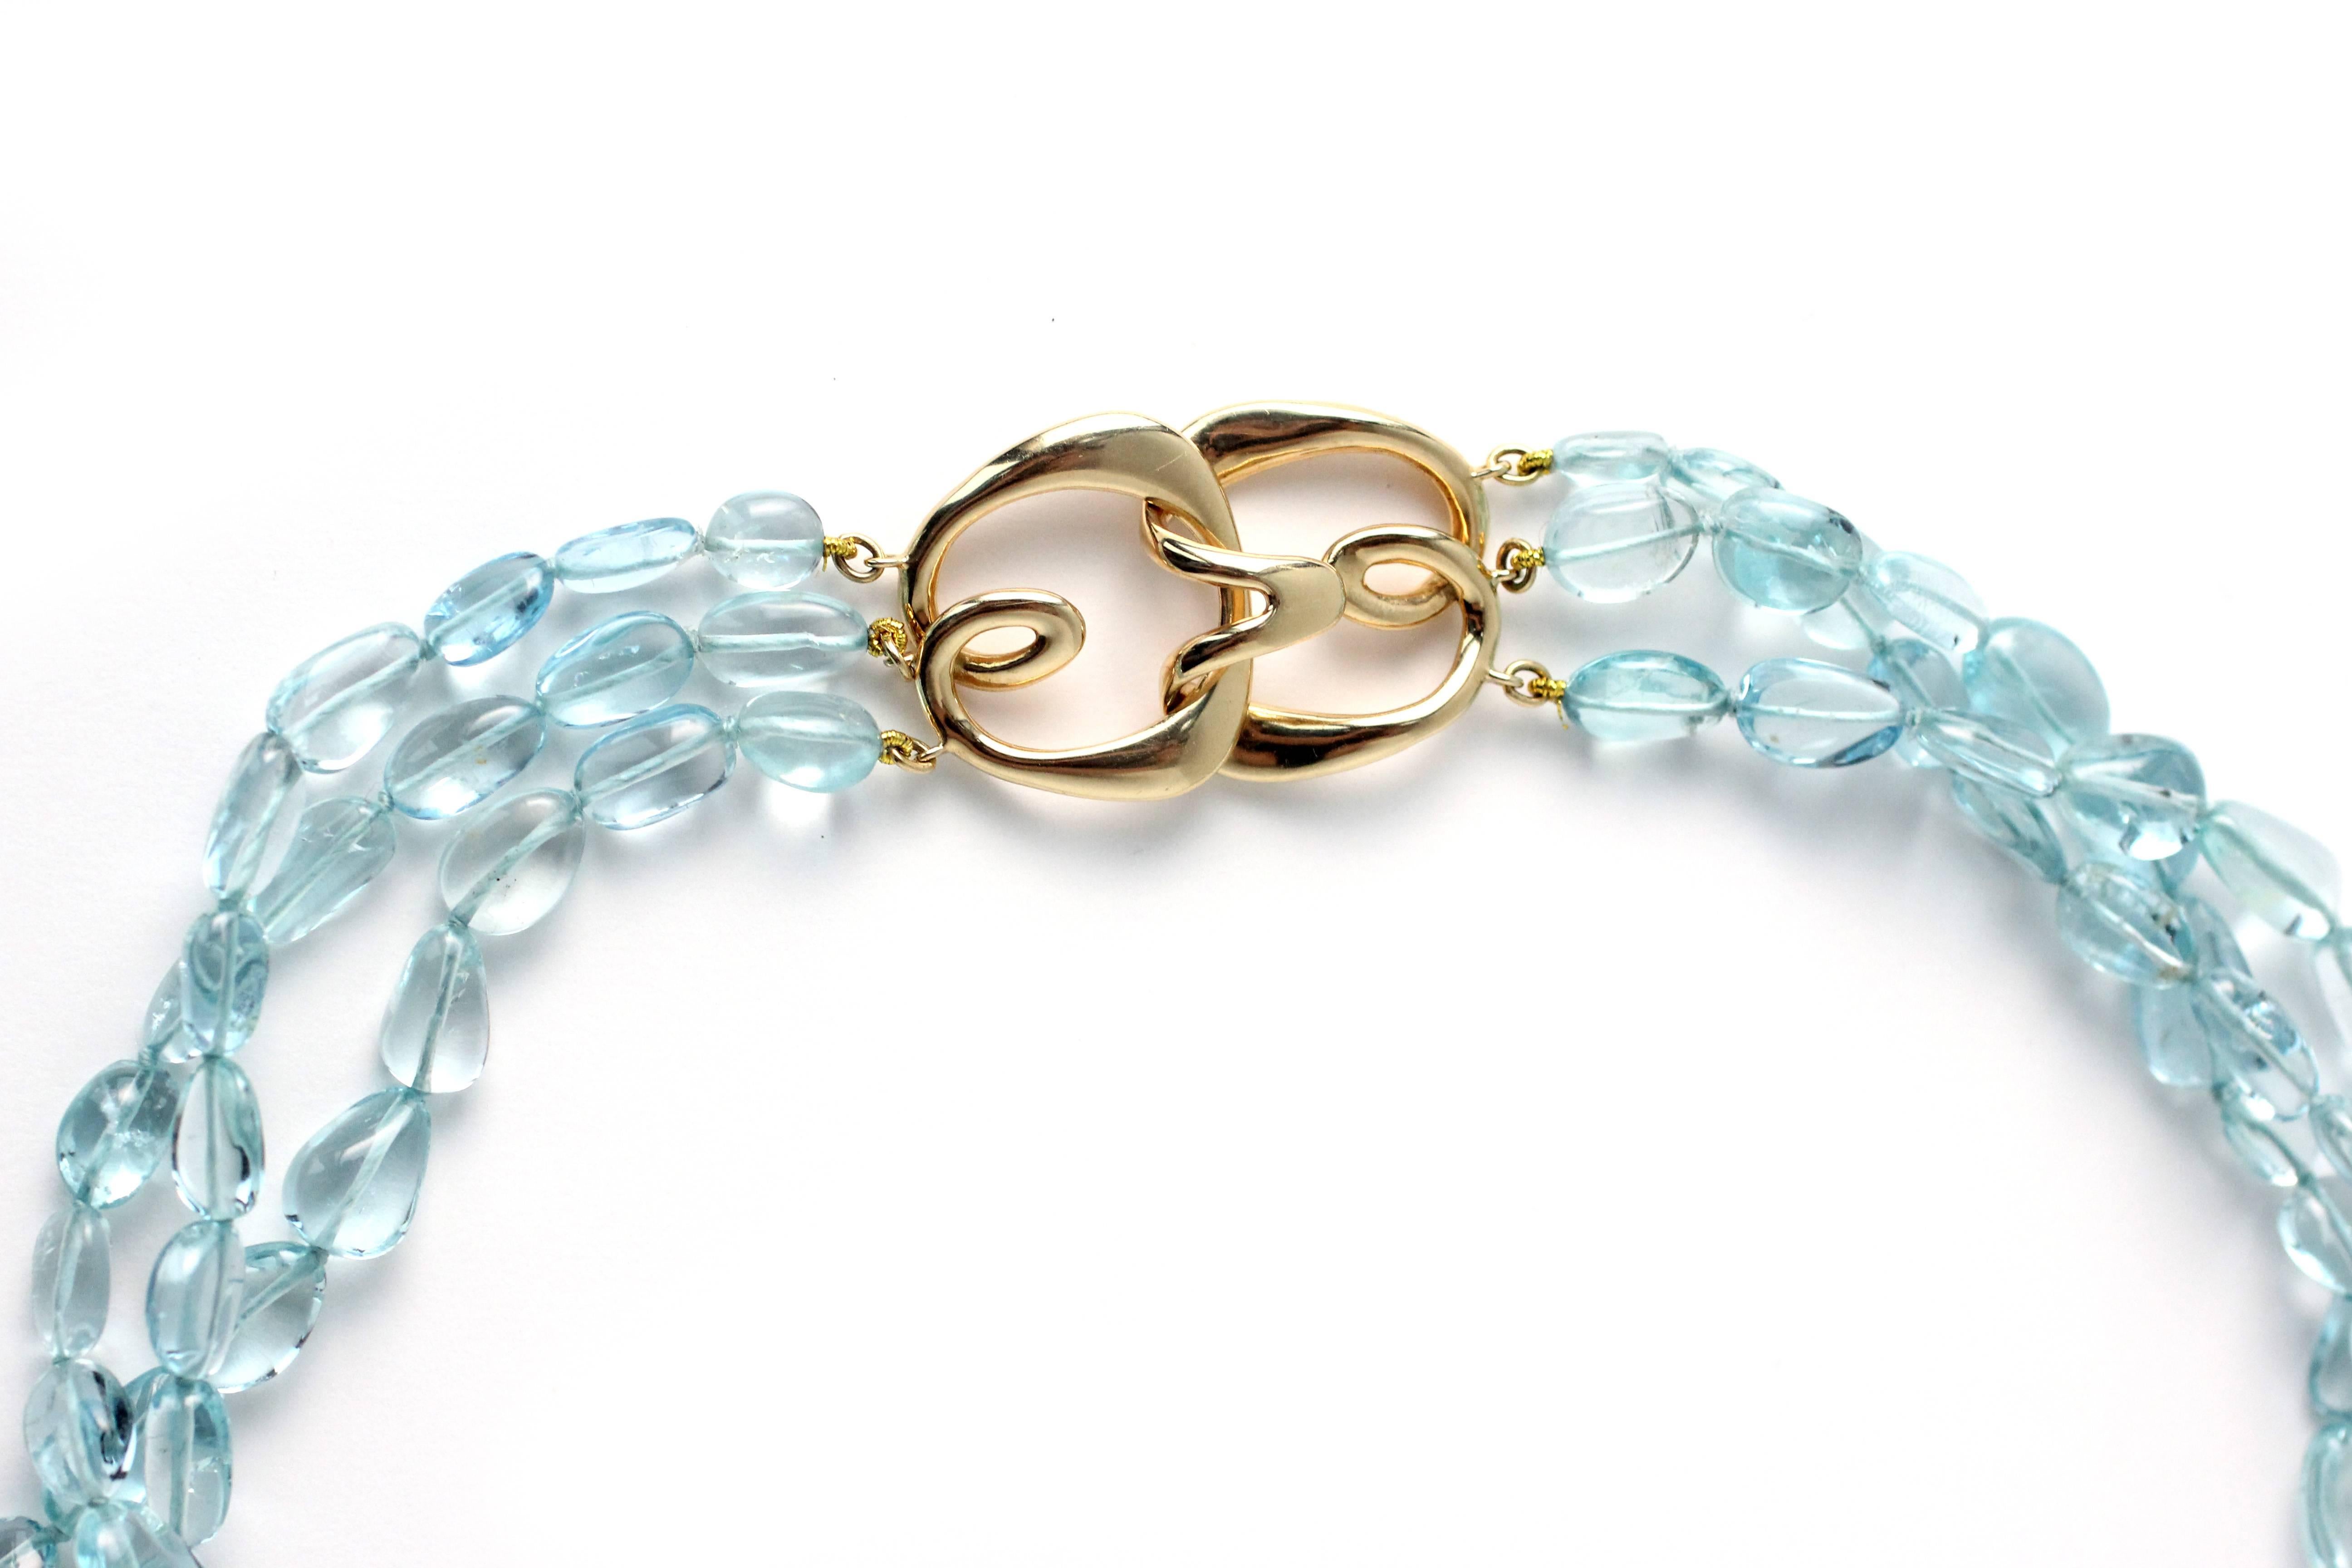 This three strand Aquamarine Necklace contains 306.42 Carats of beautiful, clear Aqua beads and has a signature Julius Cohen 18 Kt Gold Hook clasp.

Designed and made in house by Julius Cohen New York.  